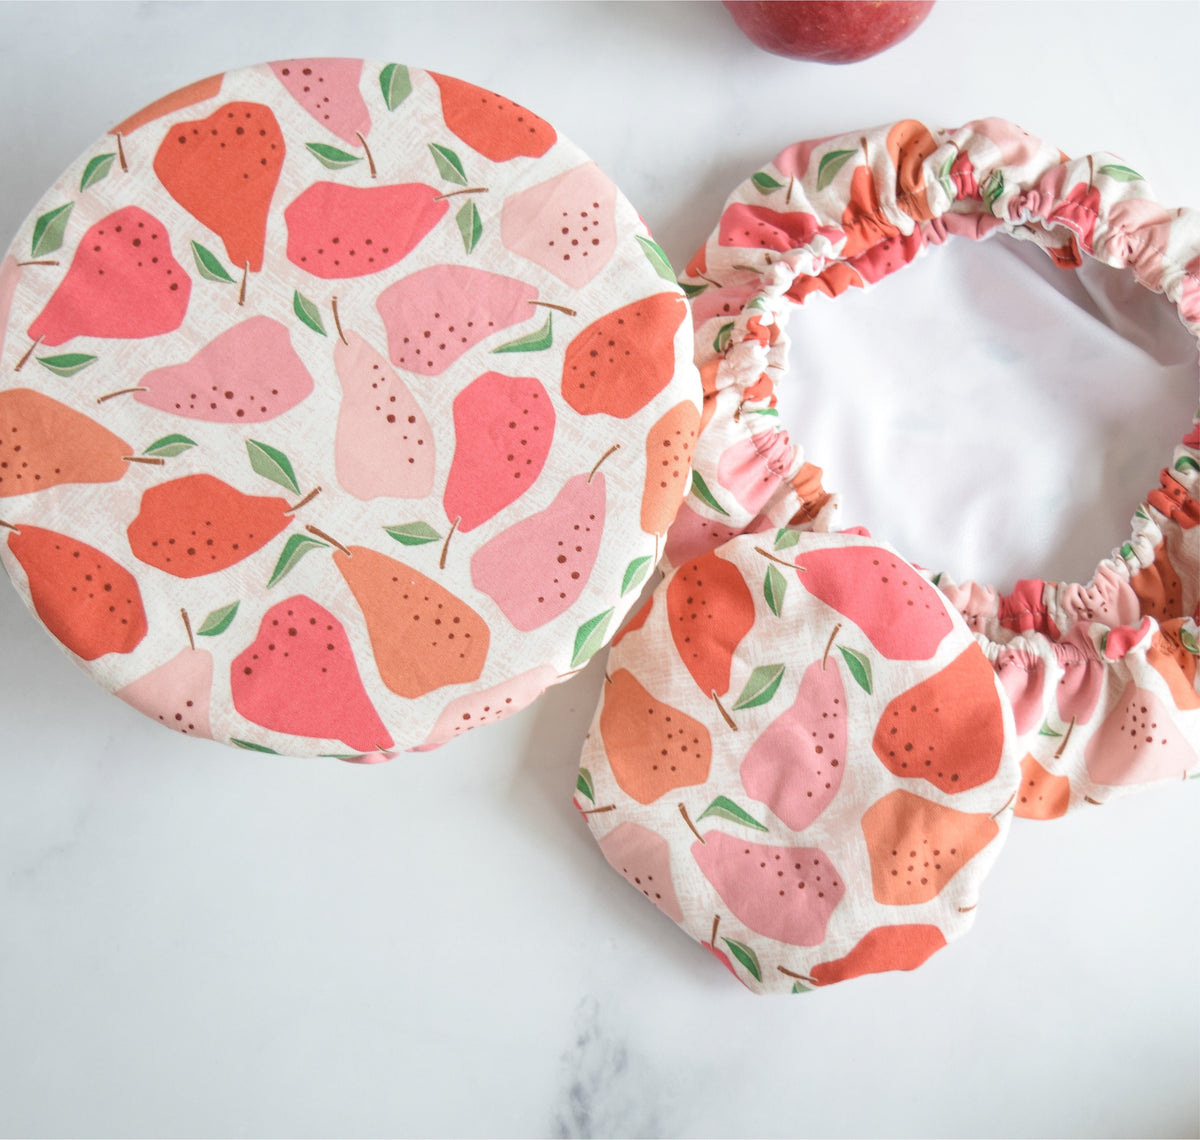 Reusable Dish Covers - Red Pear